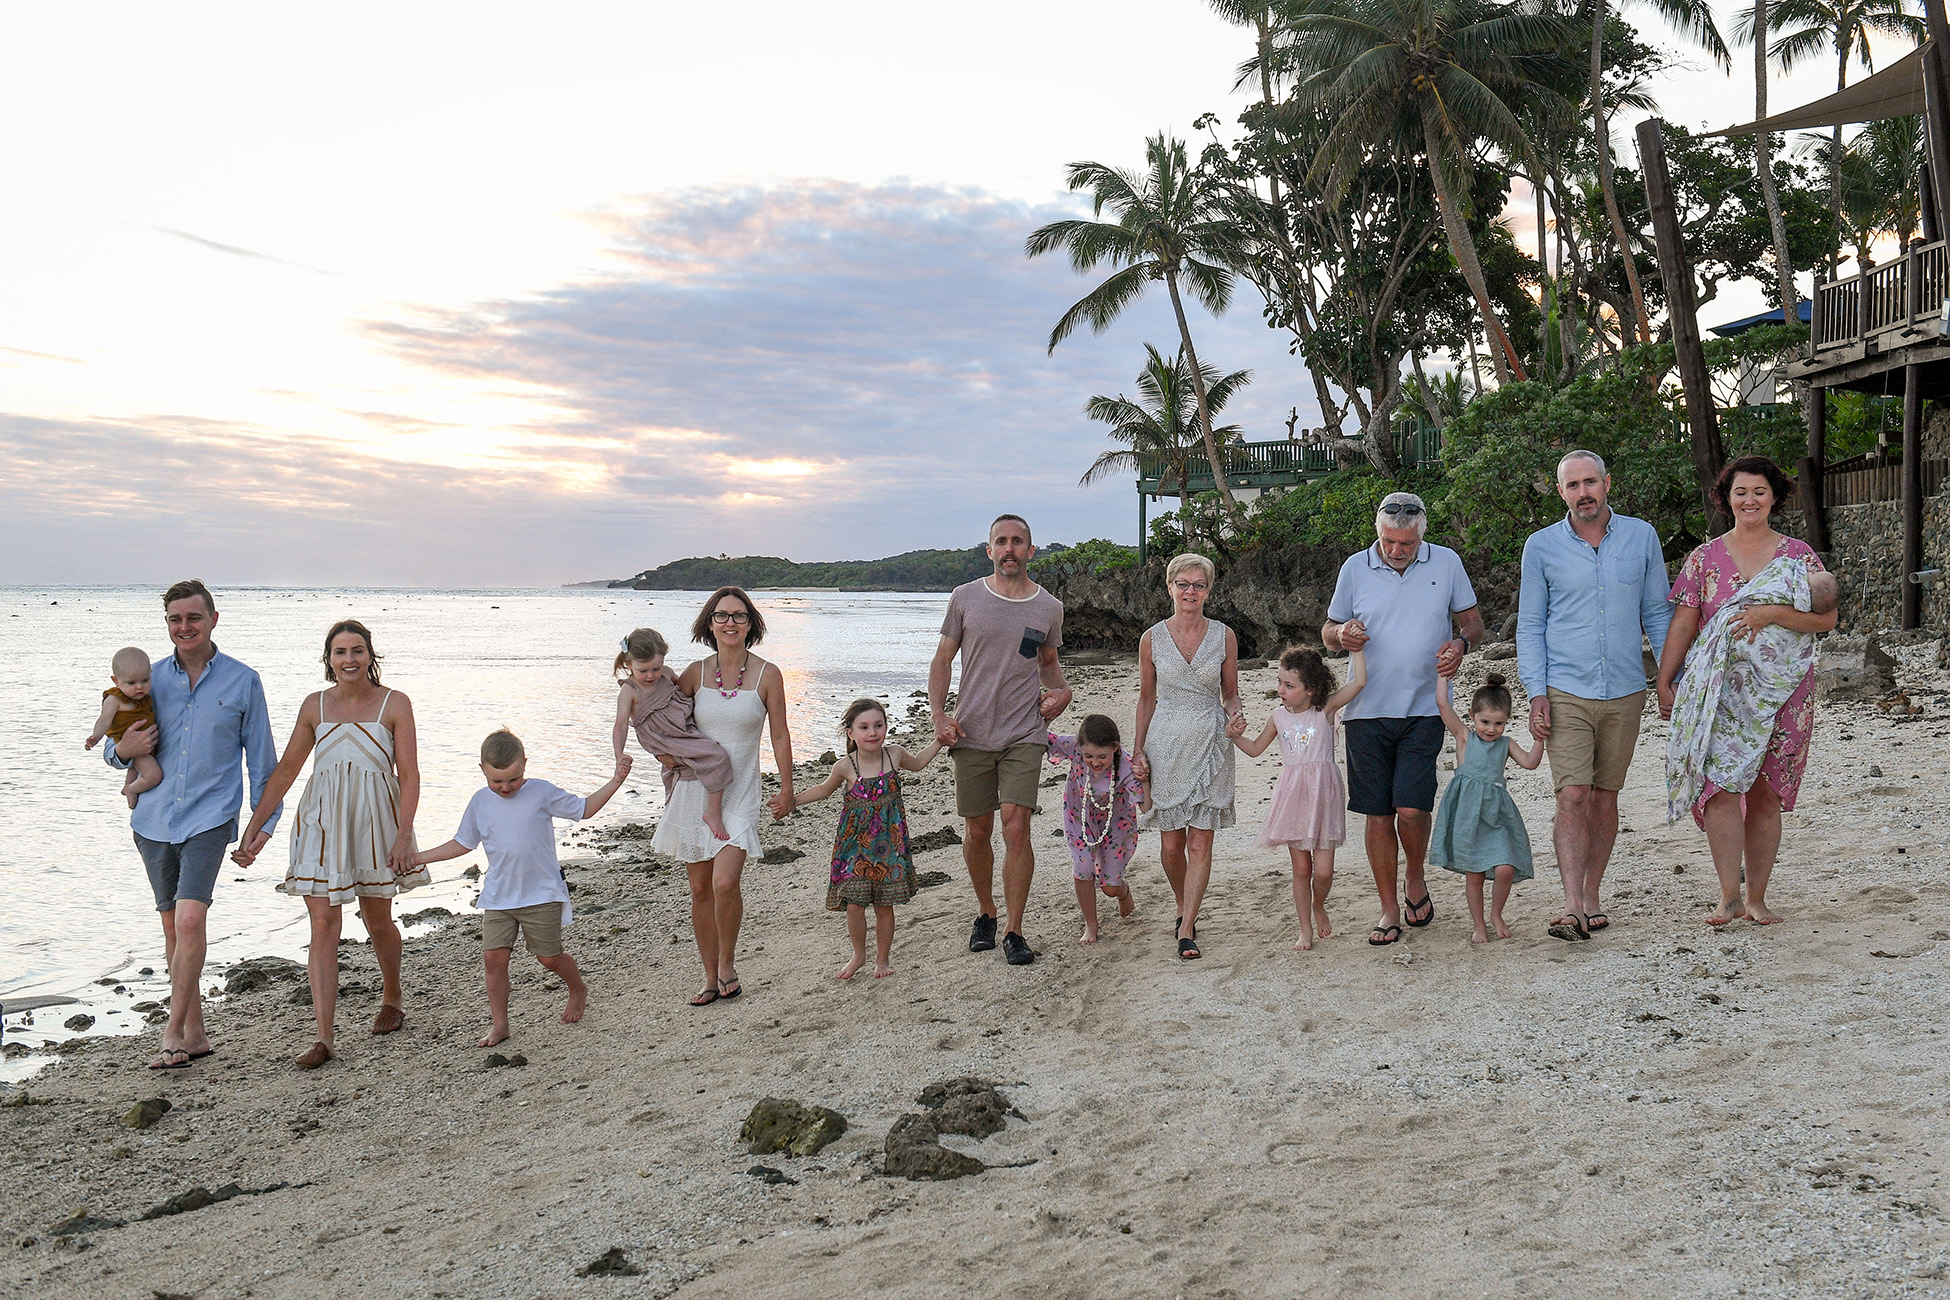 Group shot of the whole family walking together hands in hands on the beach of the Shangri La in Fiji at sunset.